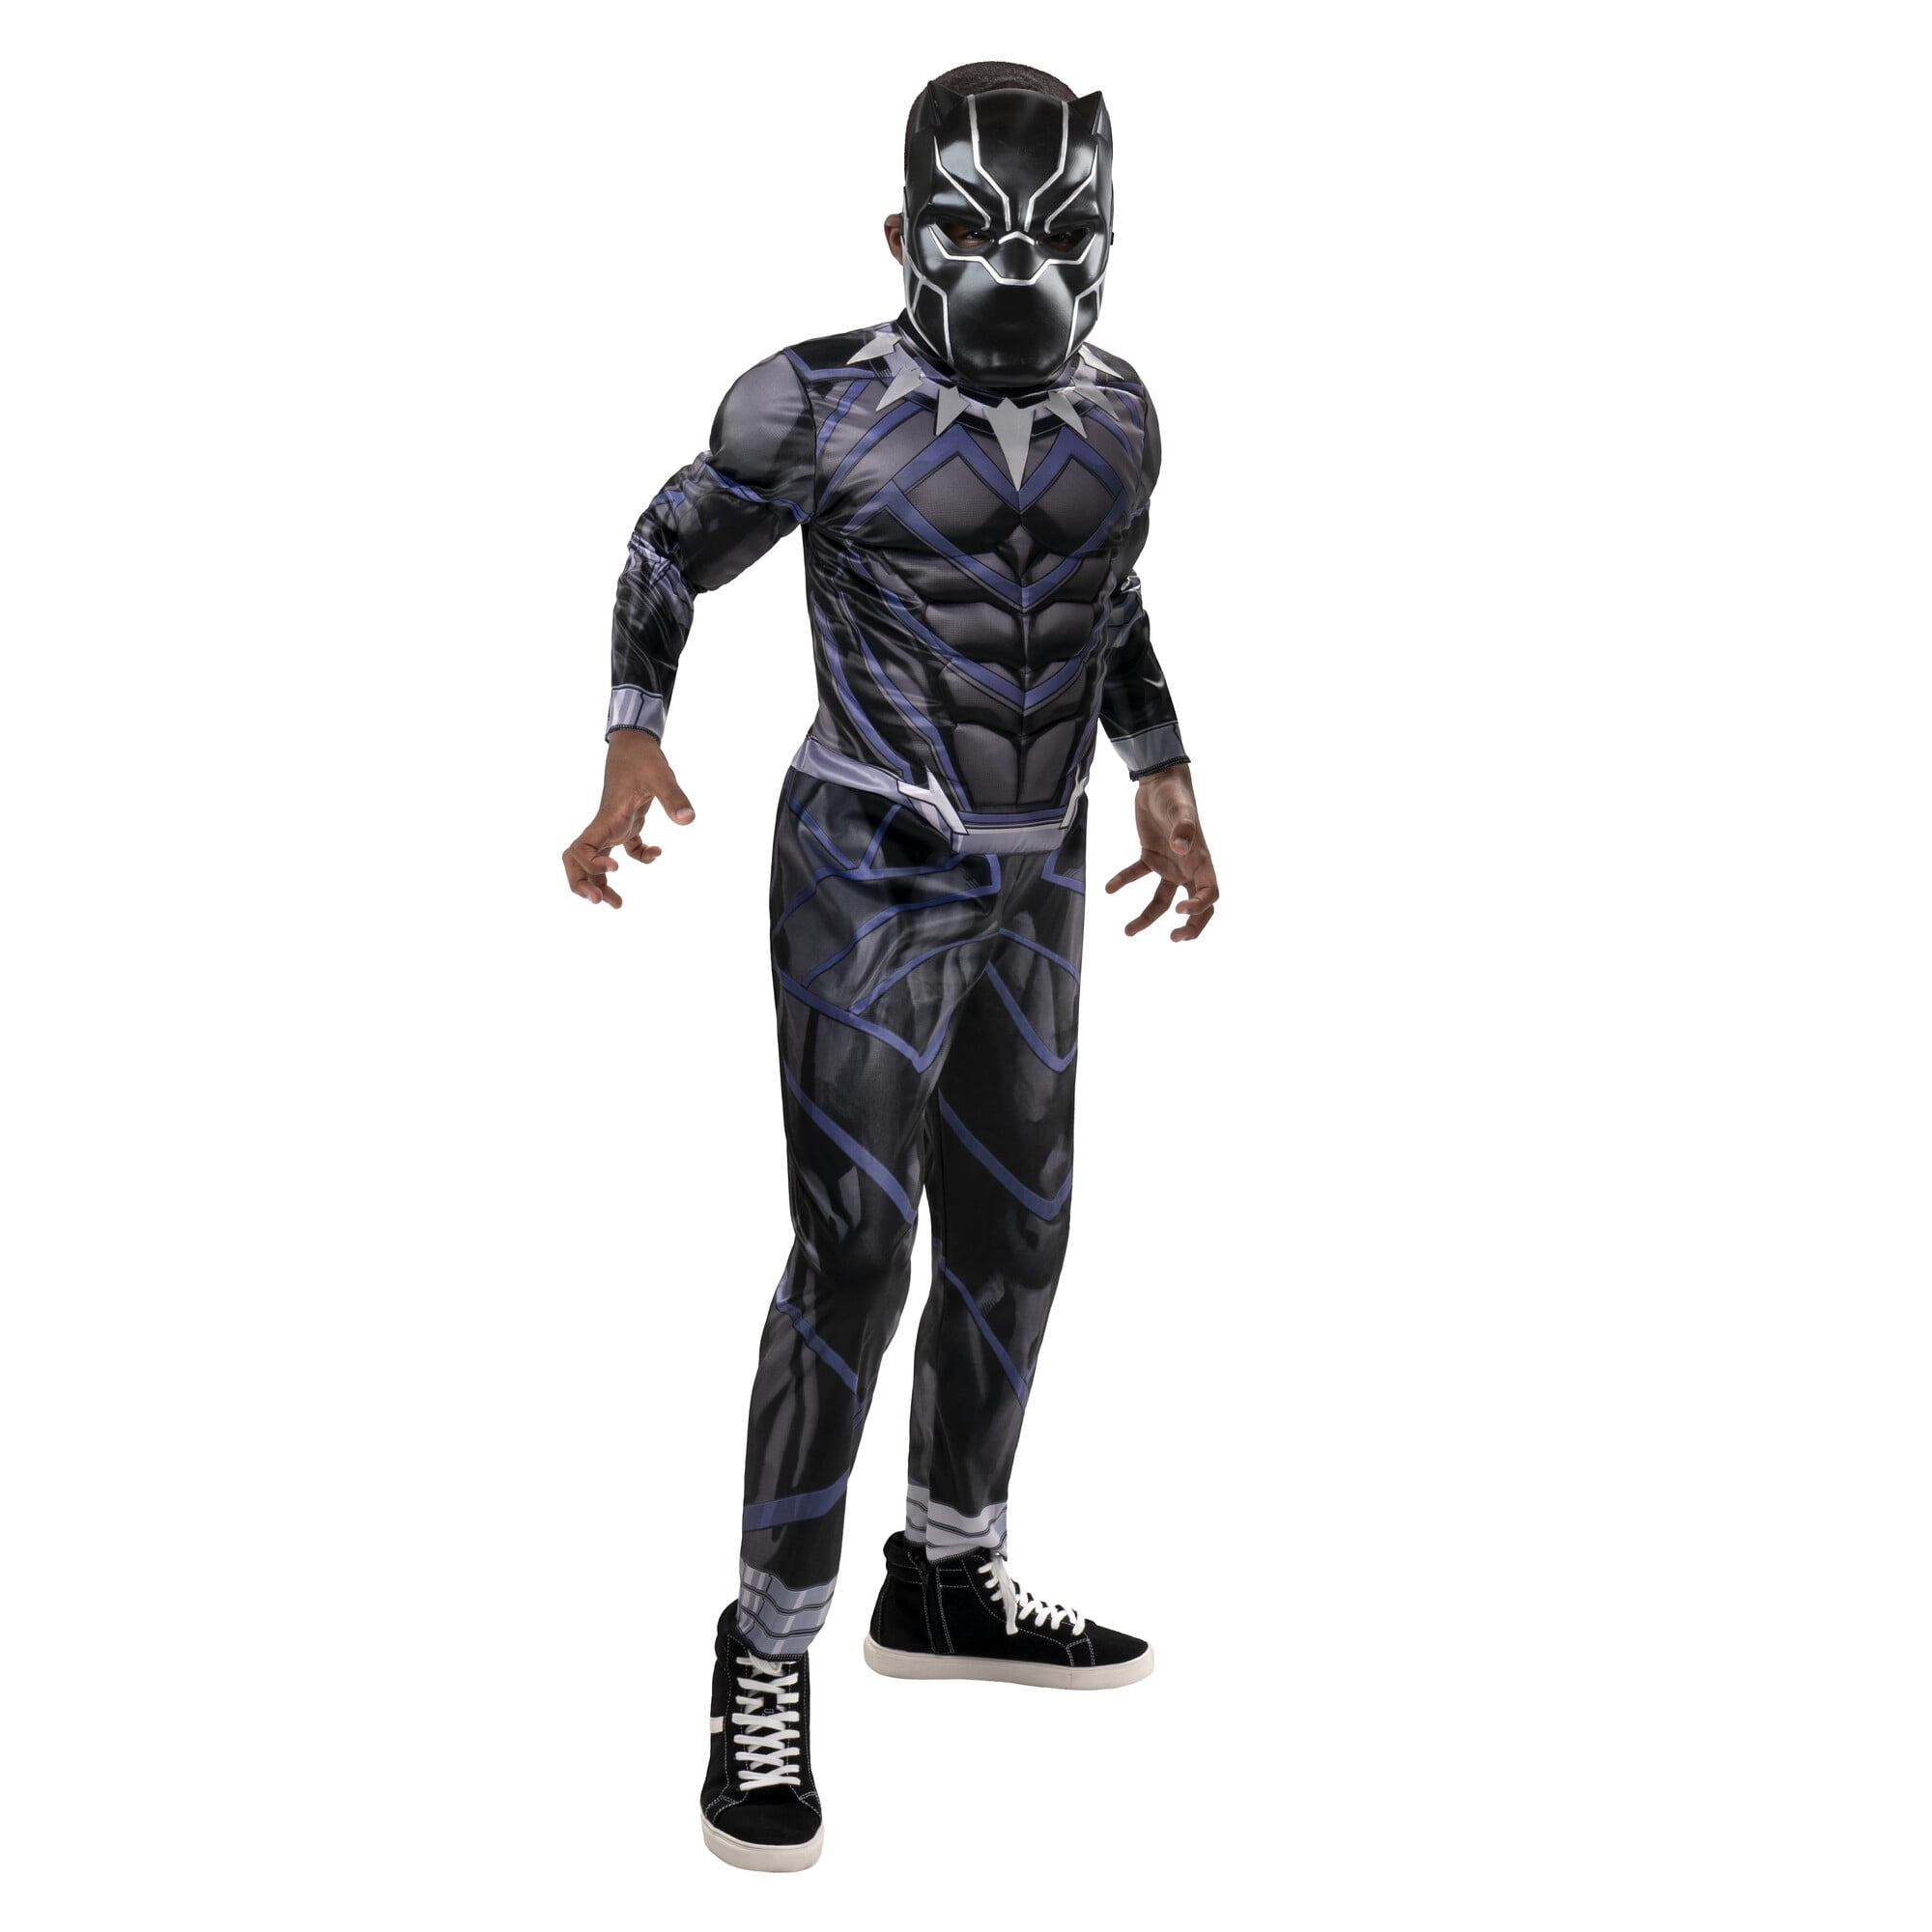 a child dressed like Black Panther